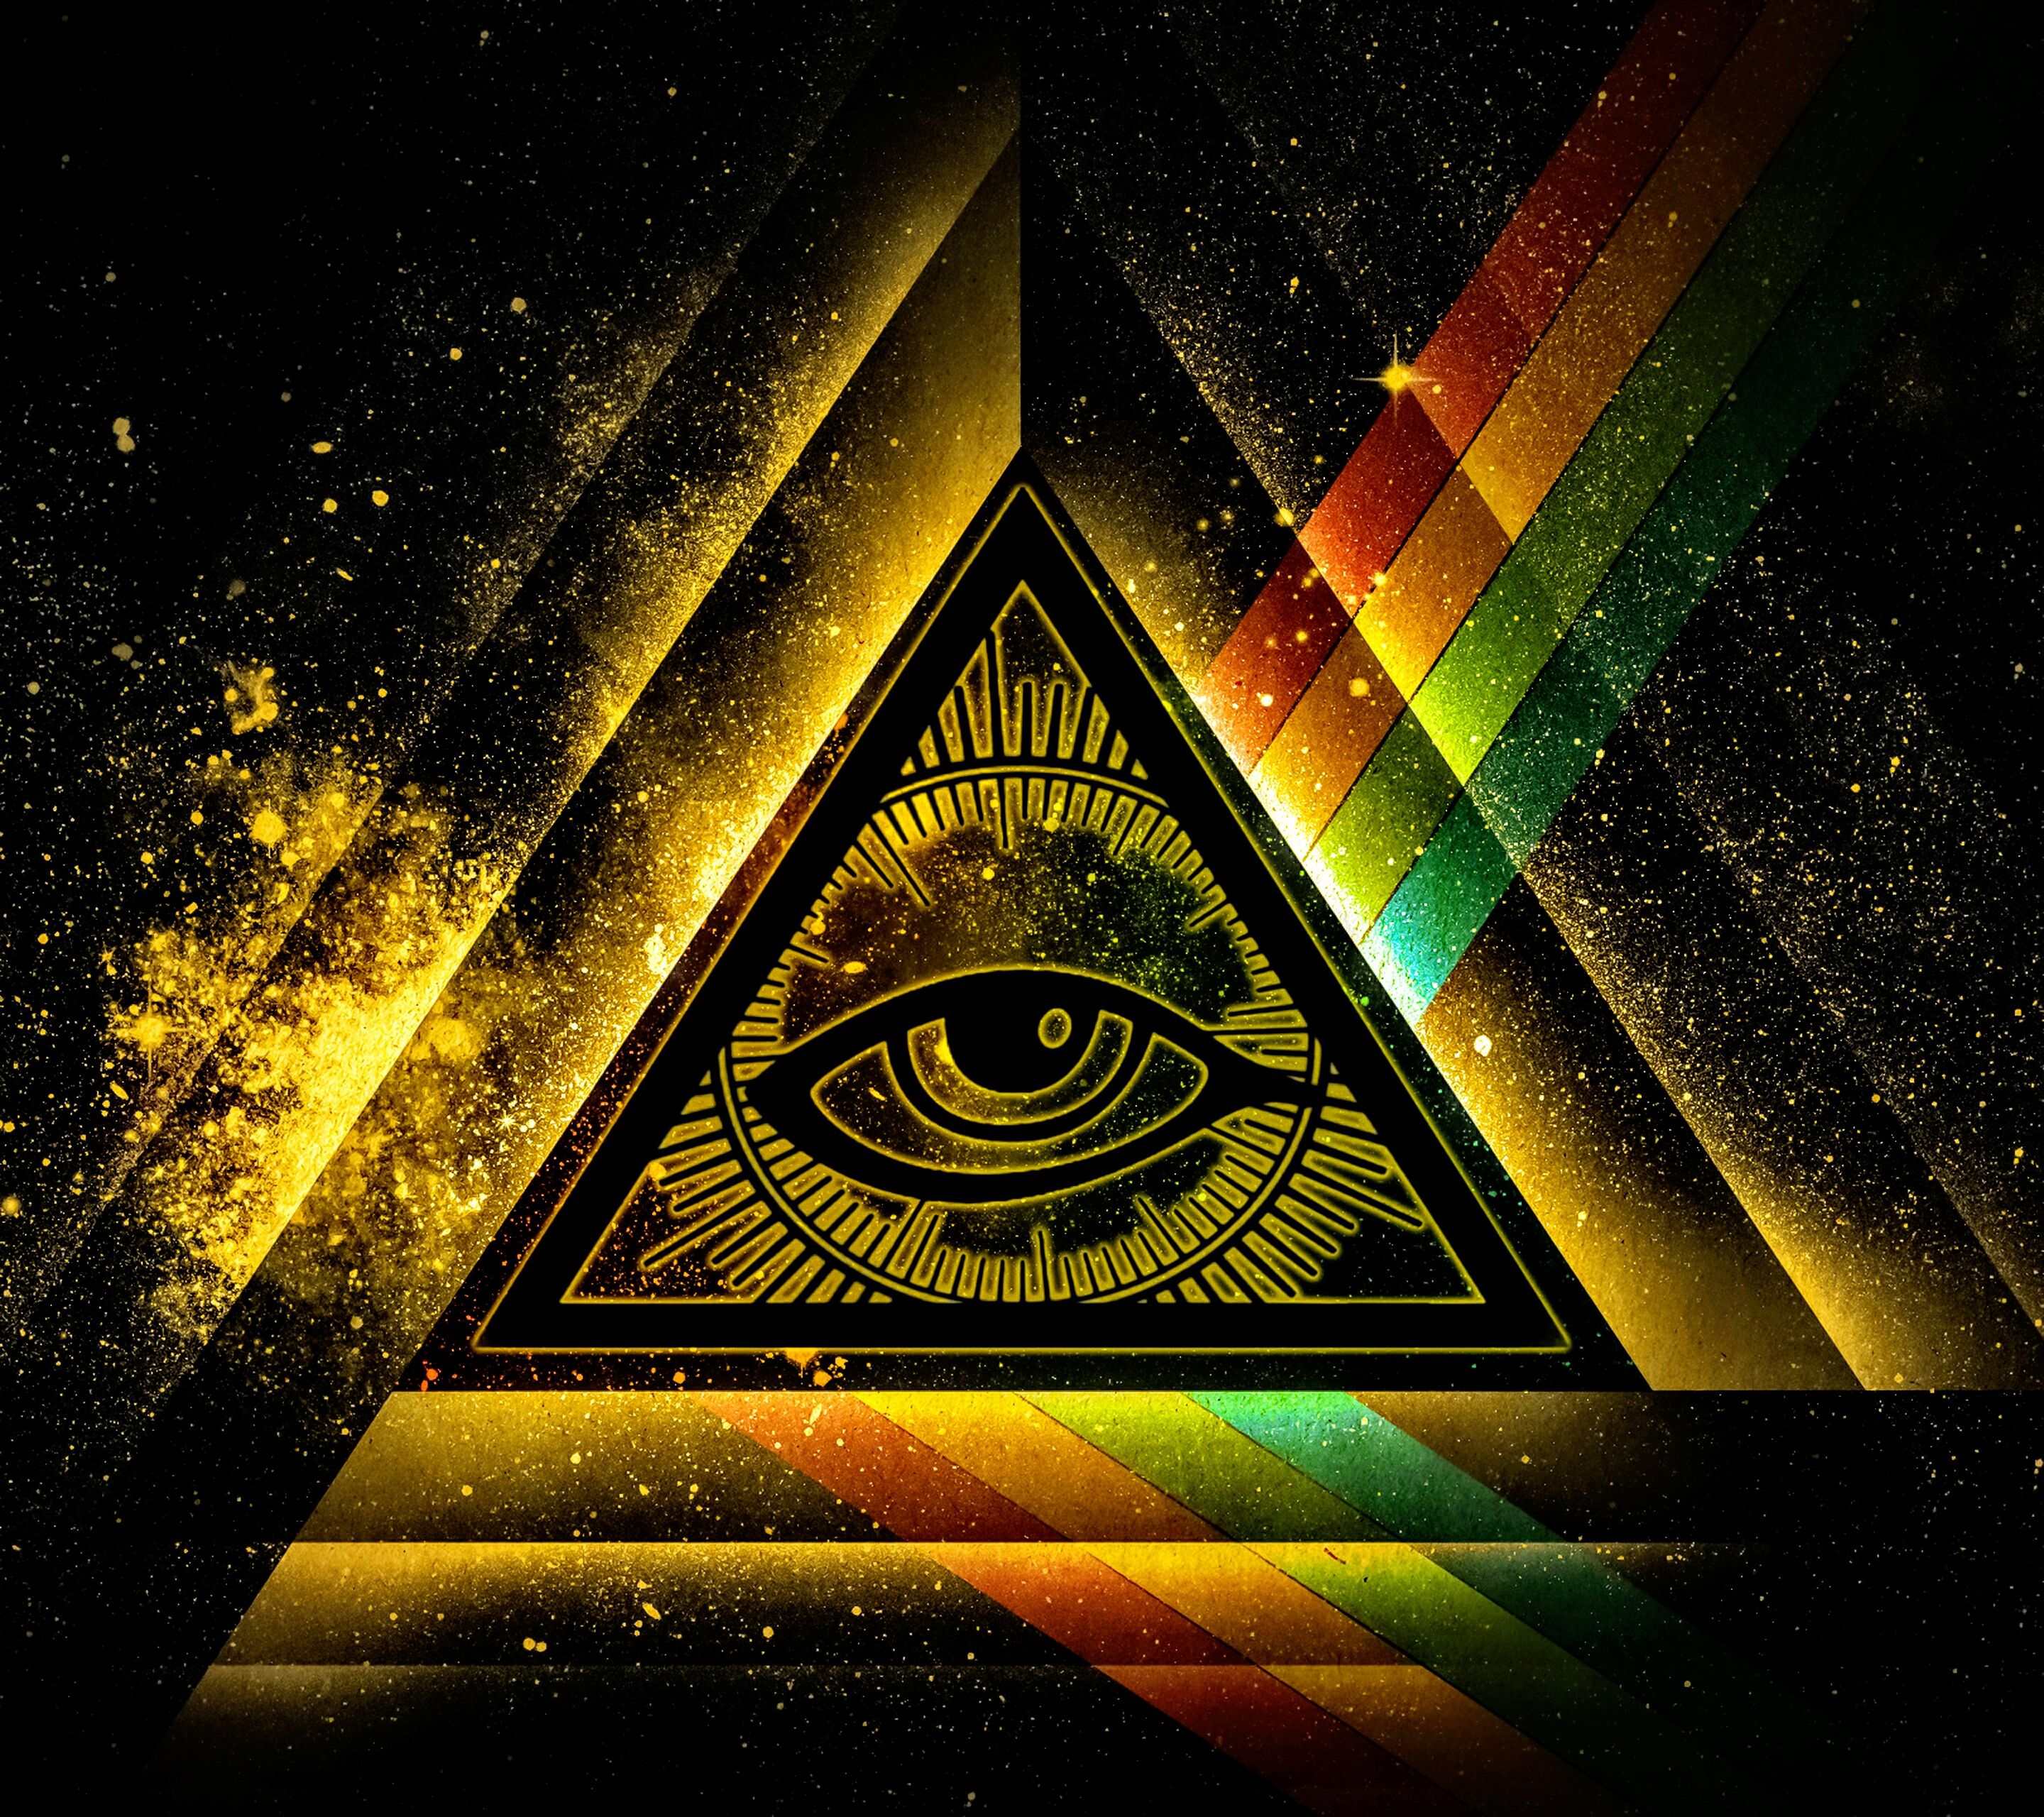 Illuminati Wallpapers Hd Backgrounds, Images, Pics, - Illuminati Wallpaper 4k - HD Wallpaper 